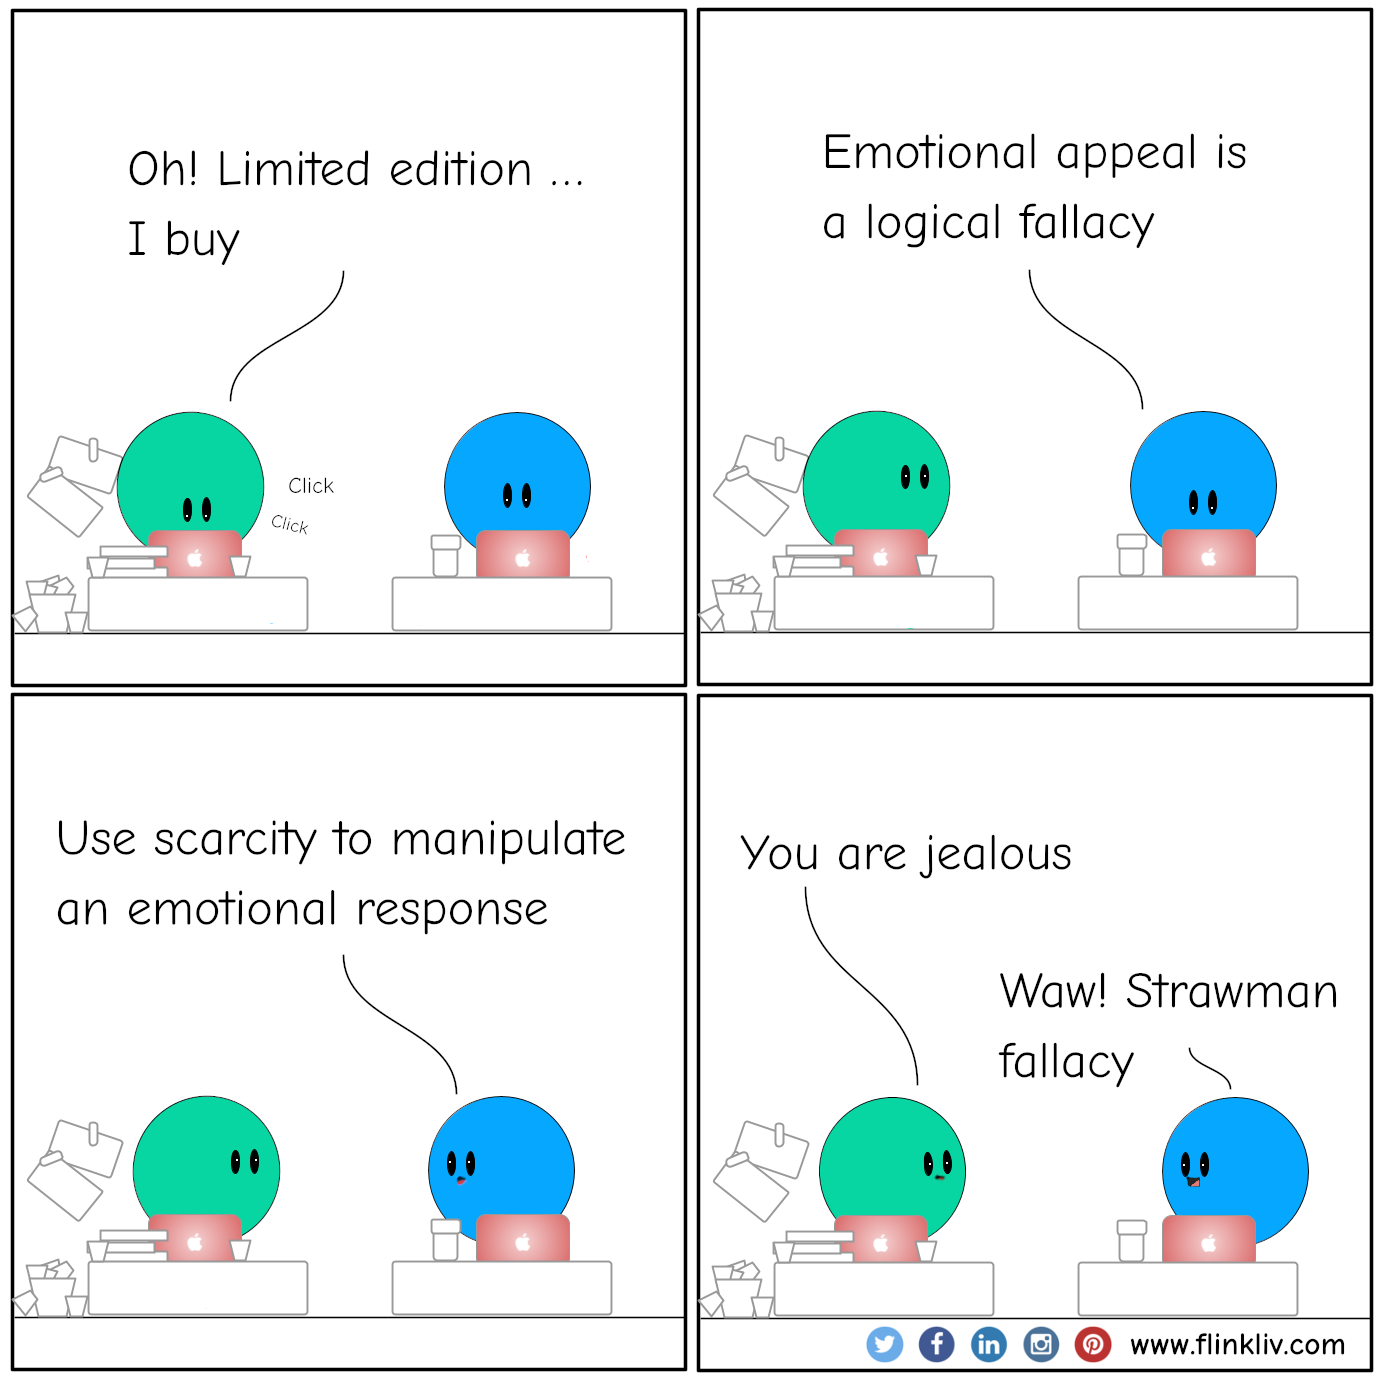 Conversation between A and B about Emotional Appeal fallacy using Scarcity A: Oh! Limited edition, I buy. (click, click) B: Emotional appeal is a logical fallacy, B: Use scarcity to manipulate an emotional response. A: You are jealous  B: Waw! Strawman fallacy. By flinkliv.com